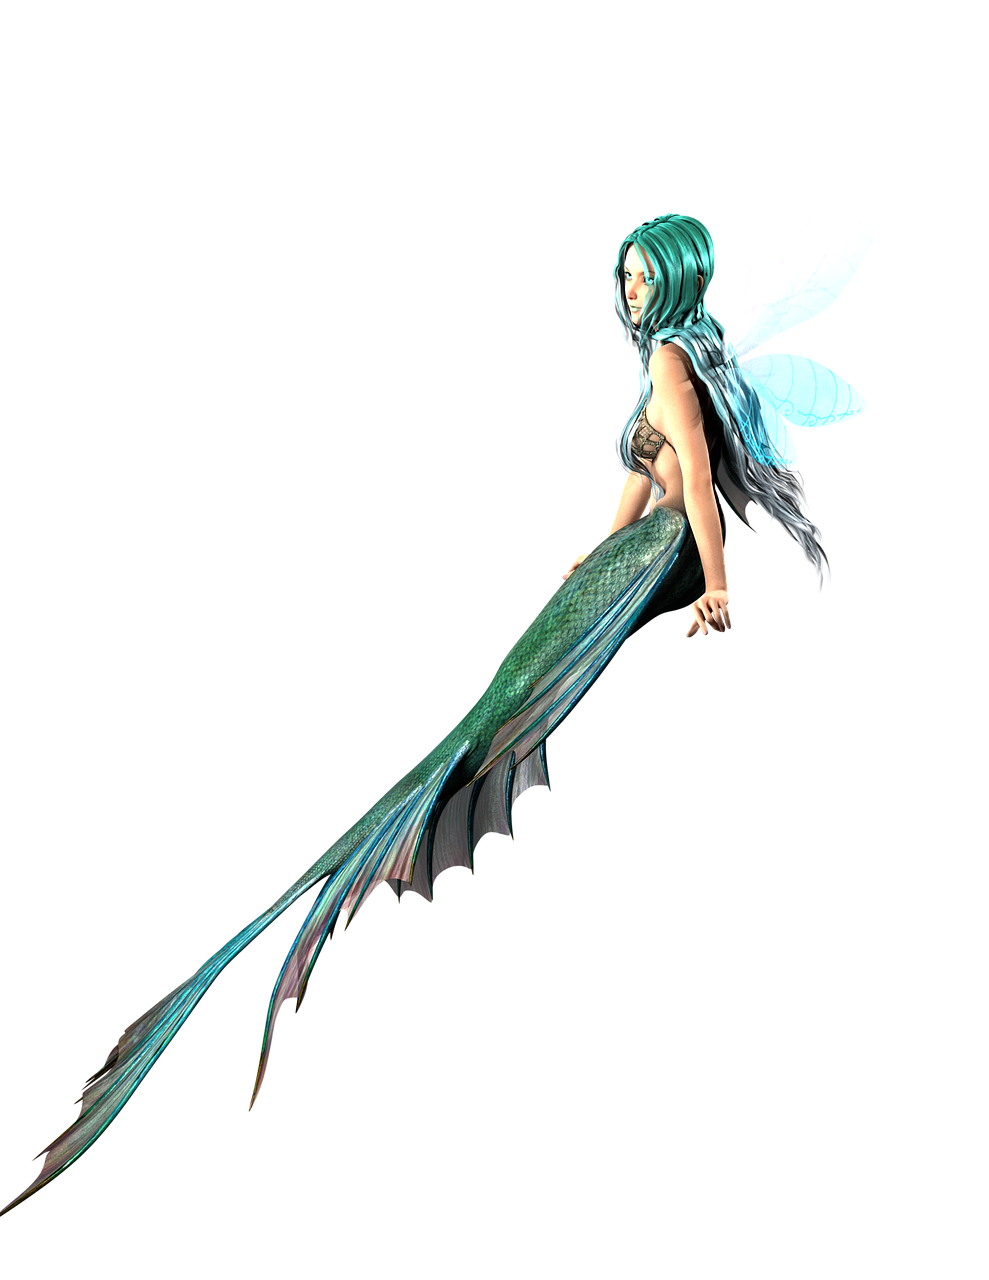 a woman dressed as a mermaid flying through the air, a raytraced image, zbrush central contest winner, hurufiyya, side view of a gaunt, (((dragonfly))), with long turquoise hair, fbx